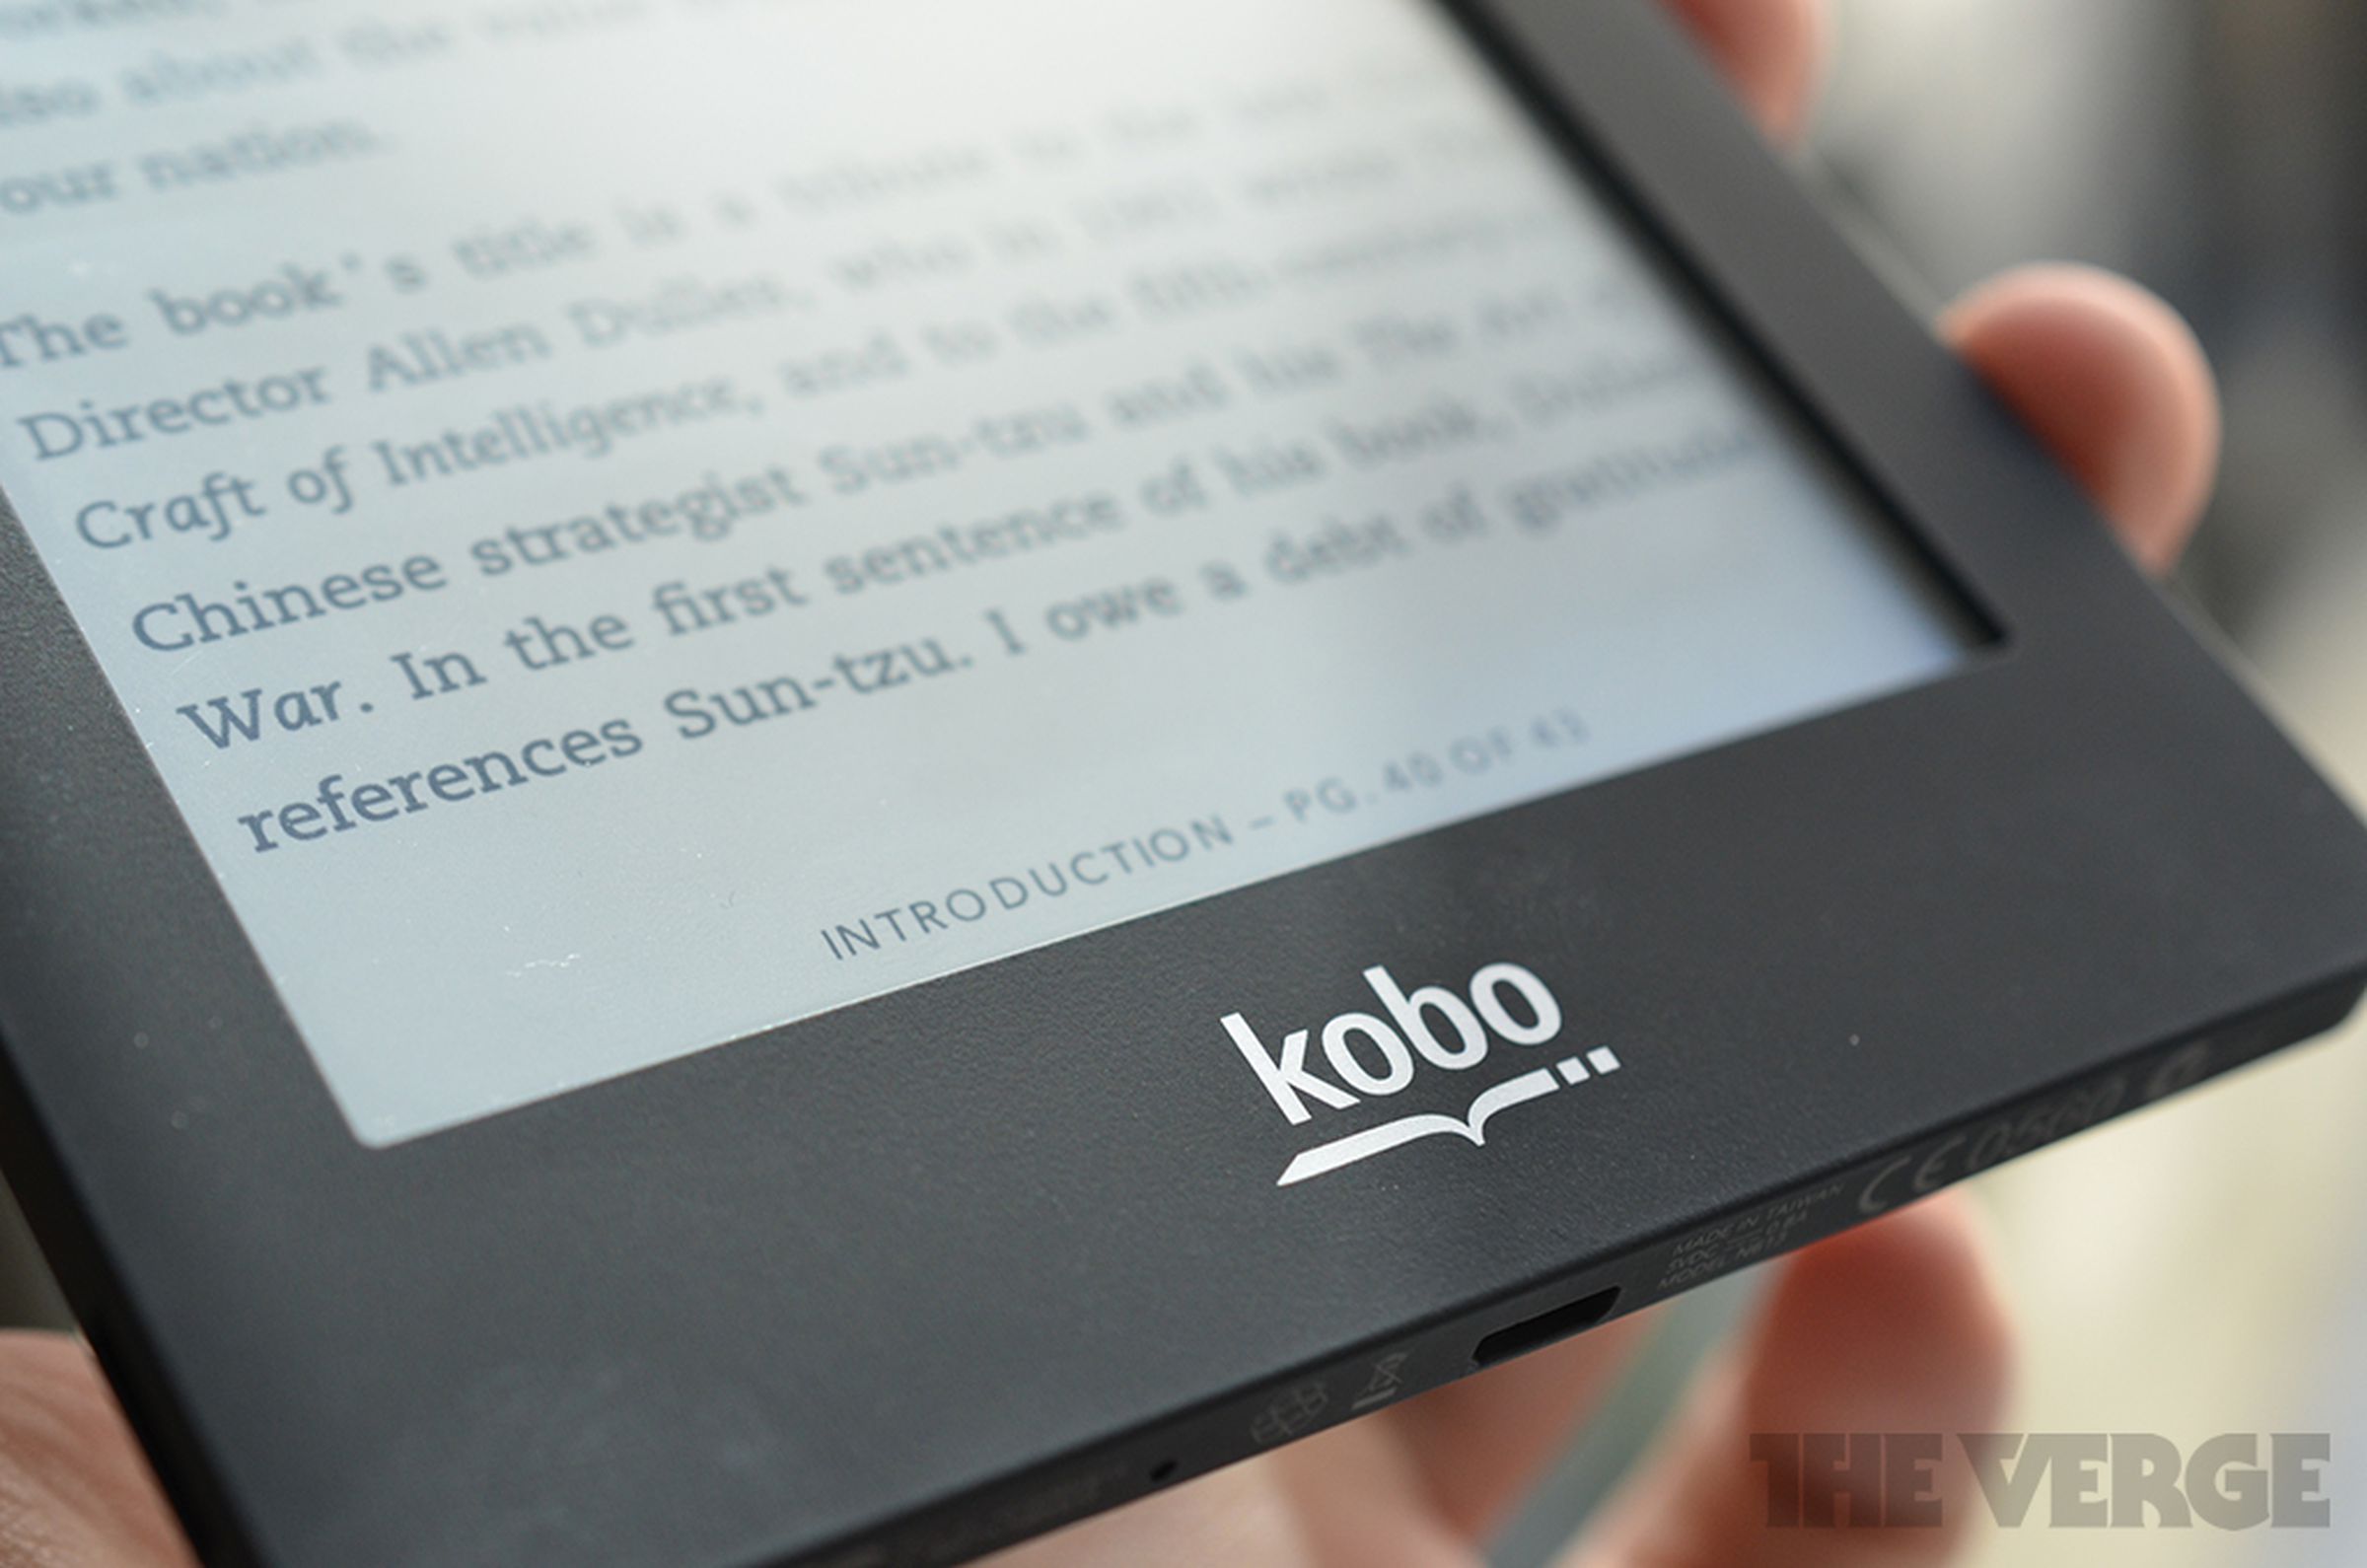 Kobo Glo front-lit e-reader hands-on pictures